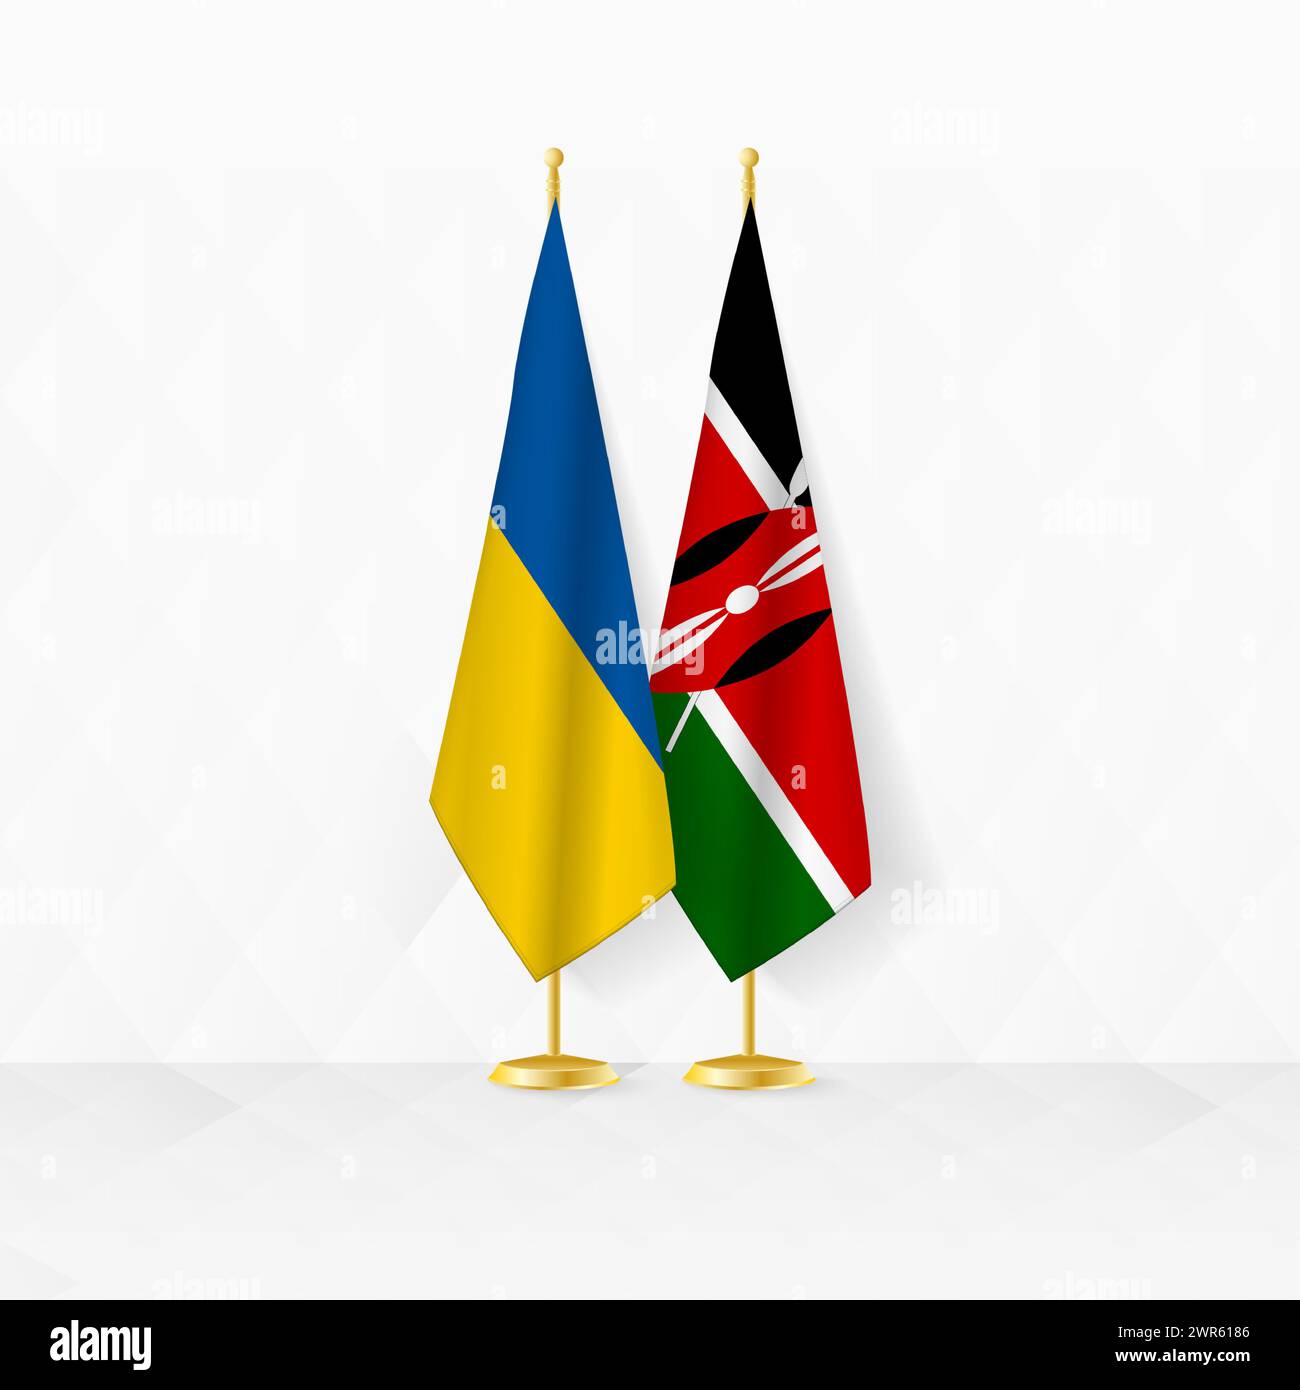 Ukraine and Kenya flags on flag stand, illustration for diplomacy and other meeting between Ukraine and Kenya. Vector illustration. Stock Vector